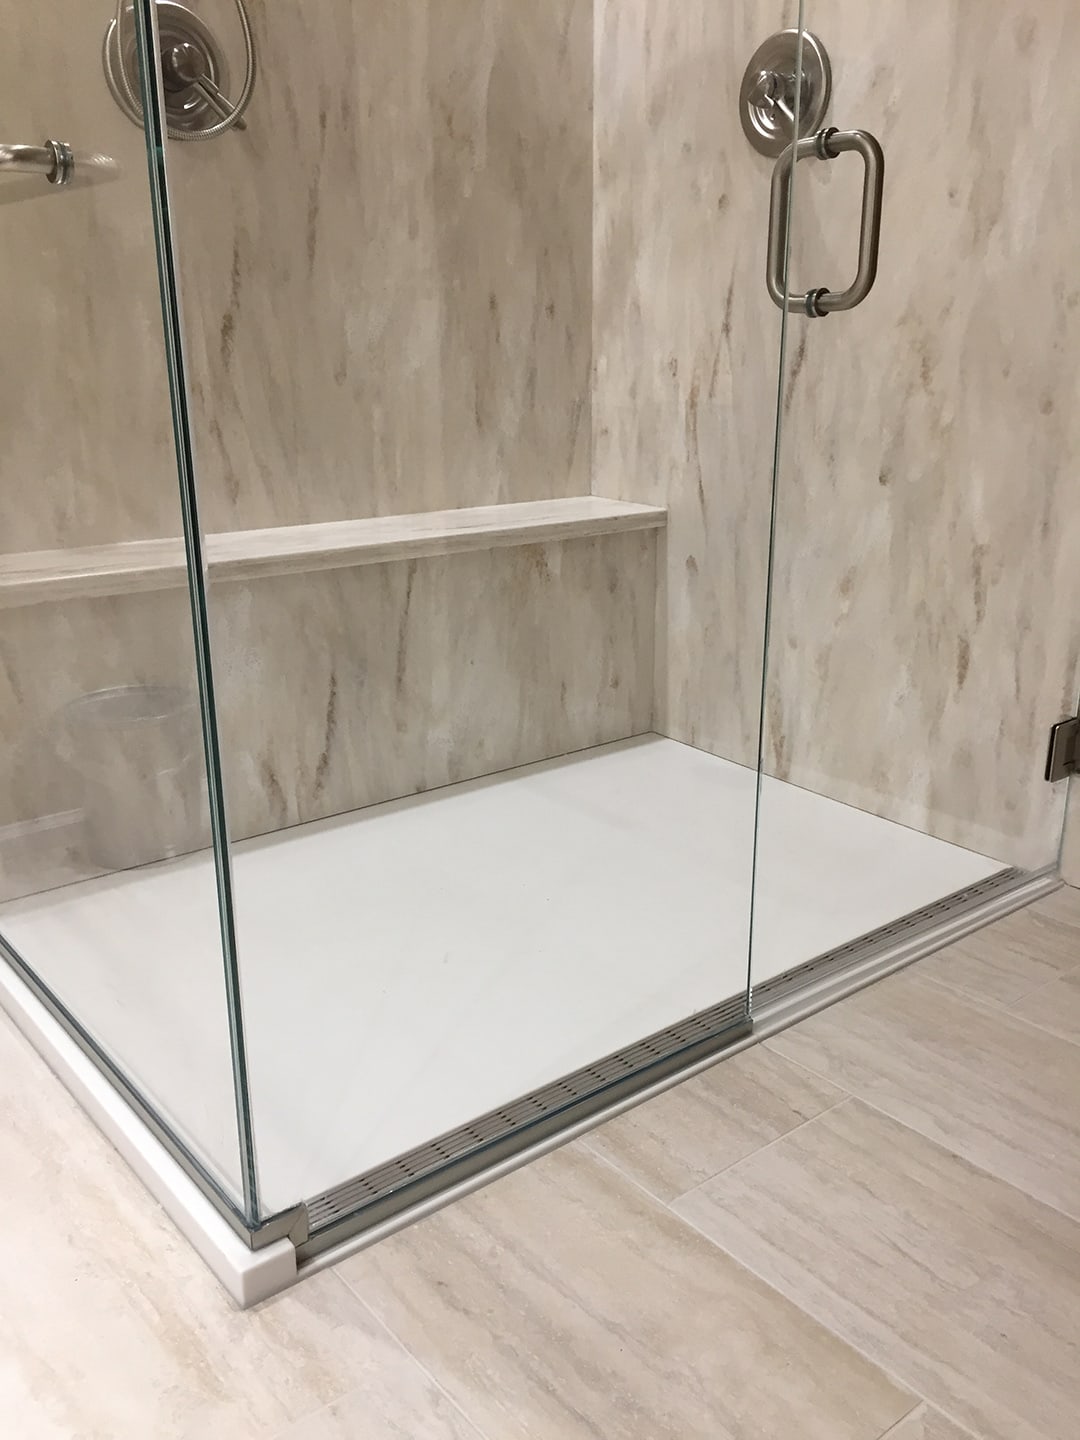 Encompass Shower Bases- Glass ledge Curbless Shower